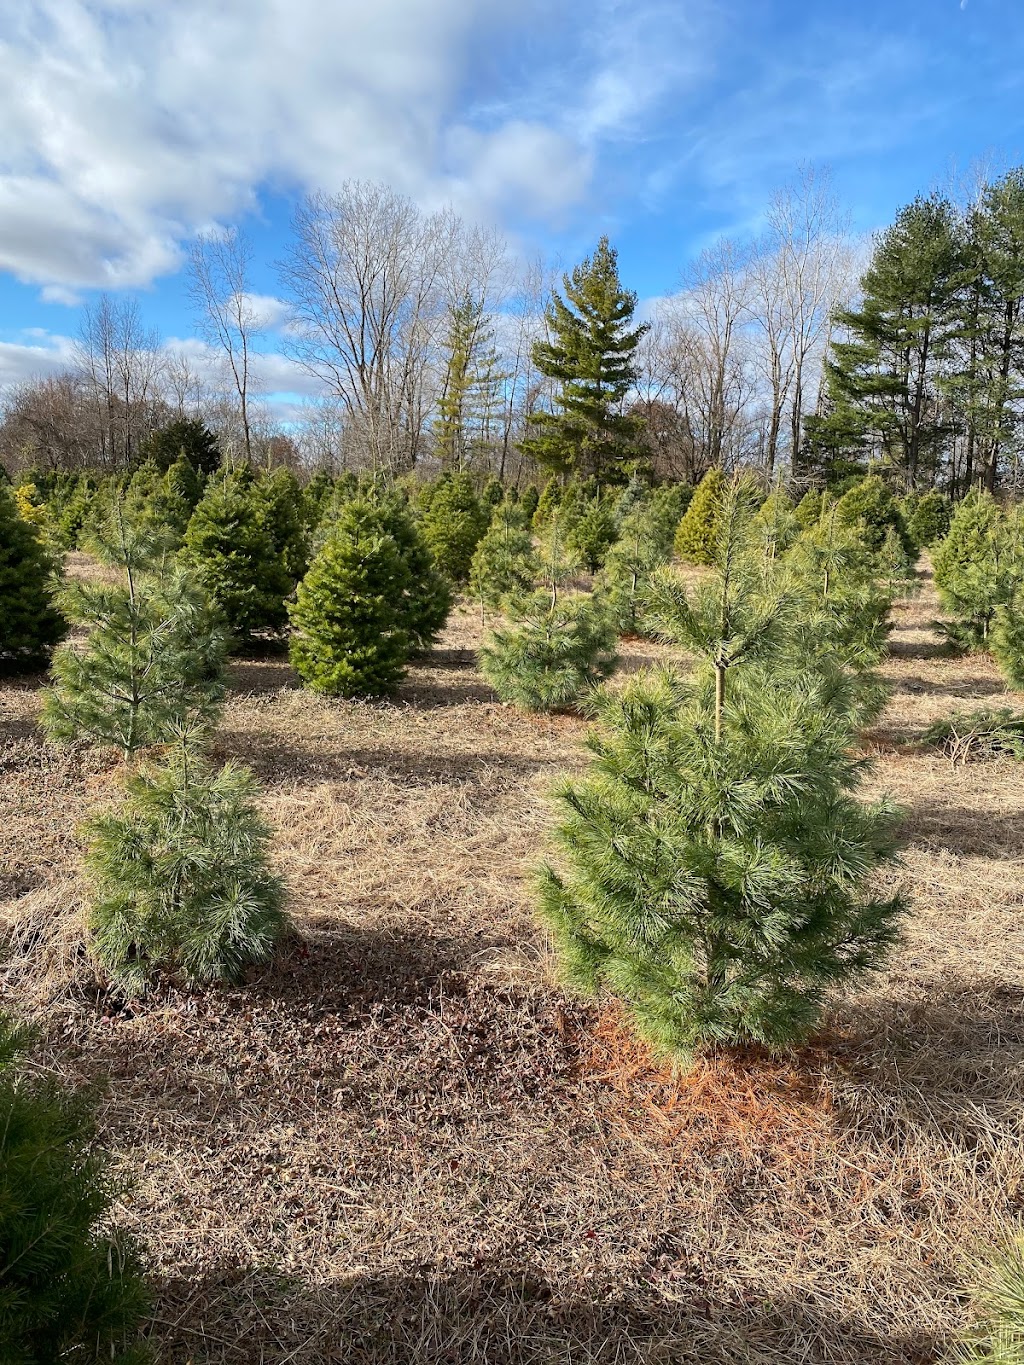 Salsberry Christmas Trees | 4595 Co Rd M, Delta, OH 43515, USA | Phone: (419) 826-6161